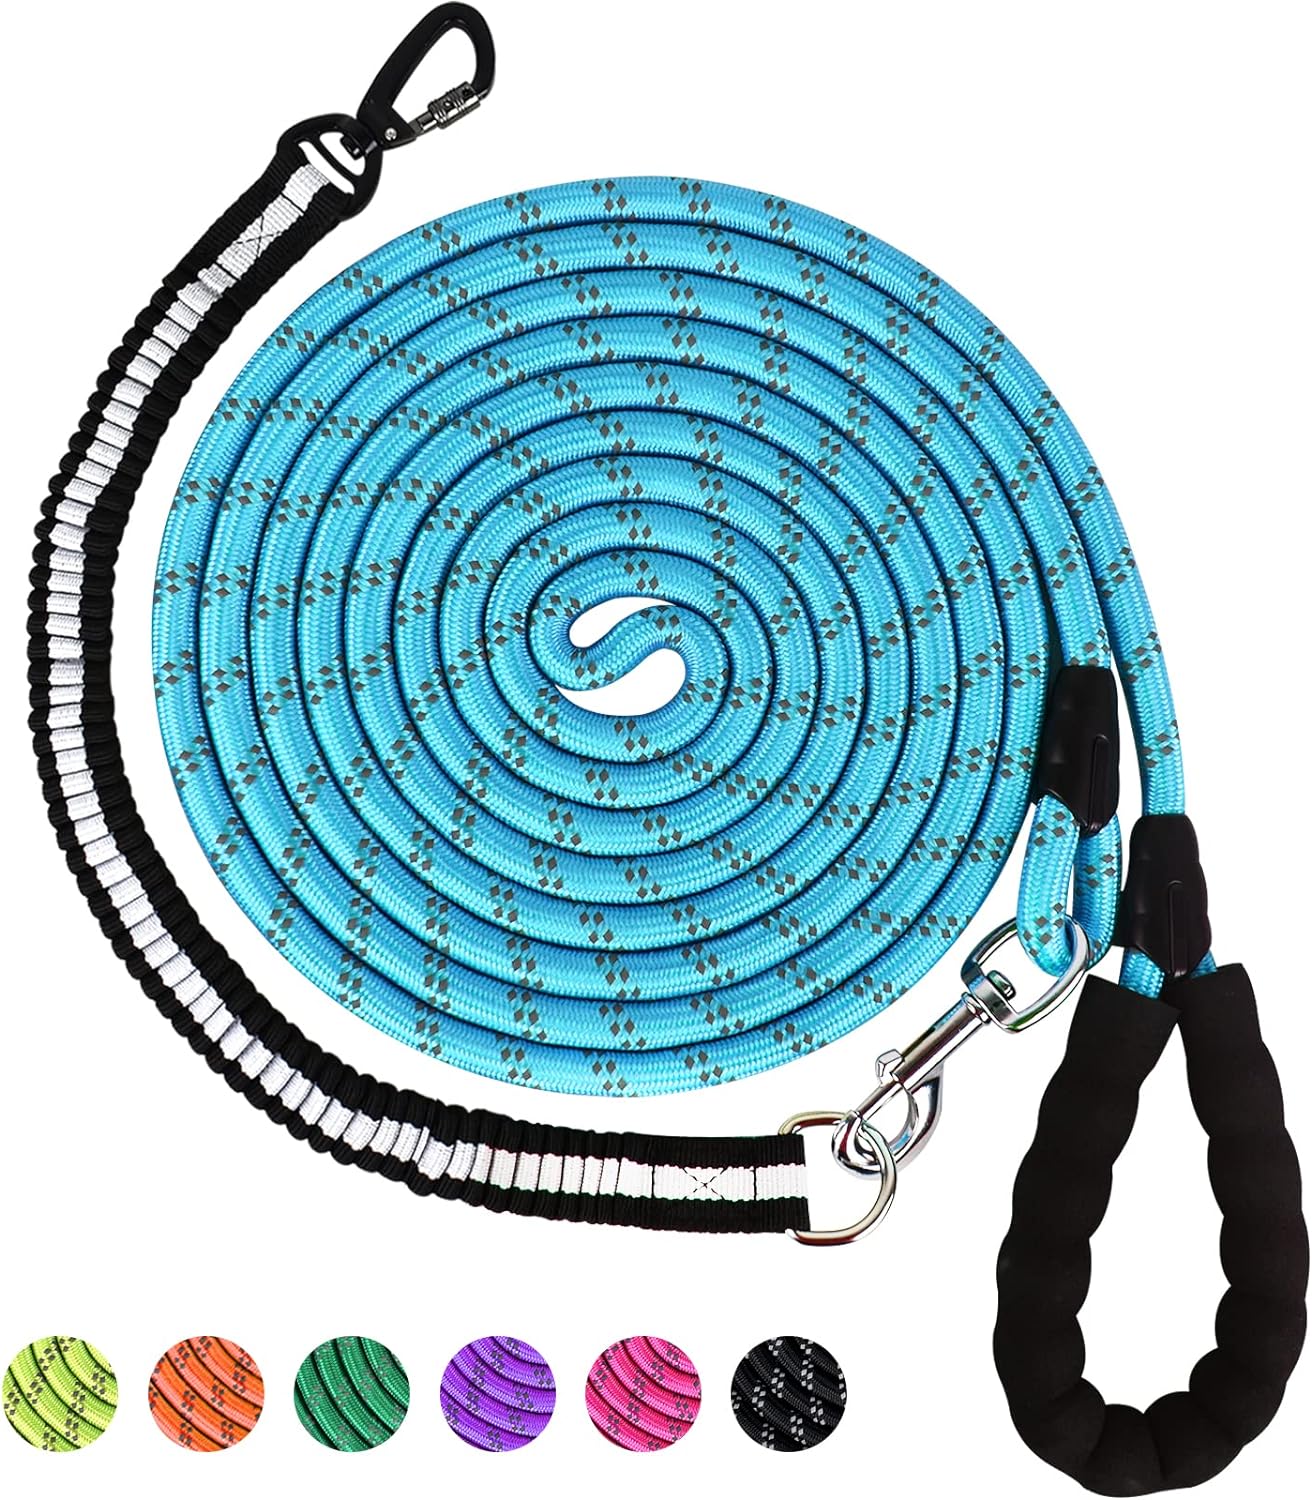 NAZOU 1/3 in Dog Leash 3FT 4FT 5FT 6FT 10FT 15FT 20FT 30FT Heavy Duty Dog Leash with Comfortable Padded Handle Dog Training for Outside Reflective Leash for Small Medium Large Dogs Up to 95LBS Blue